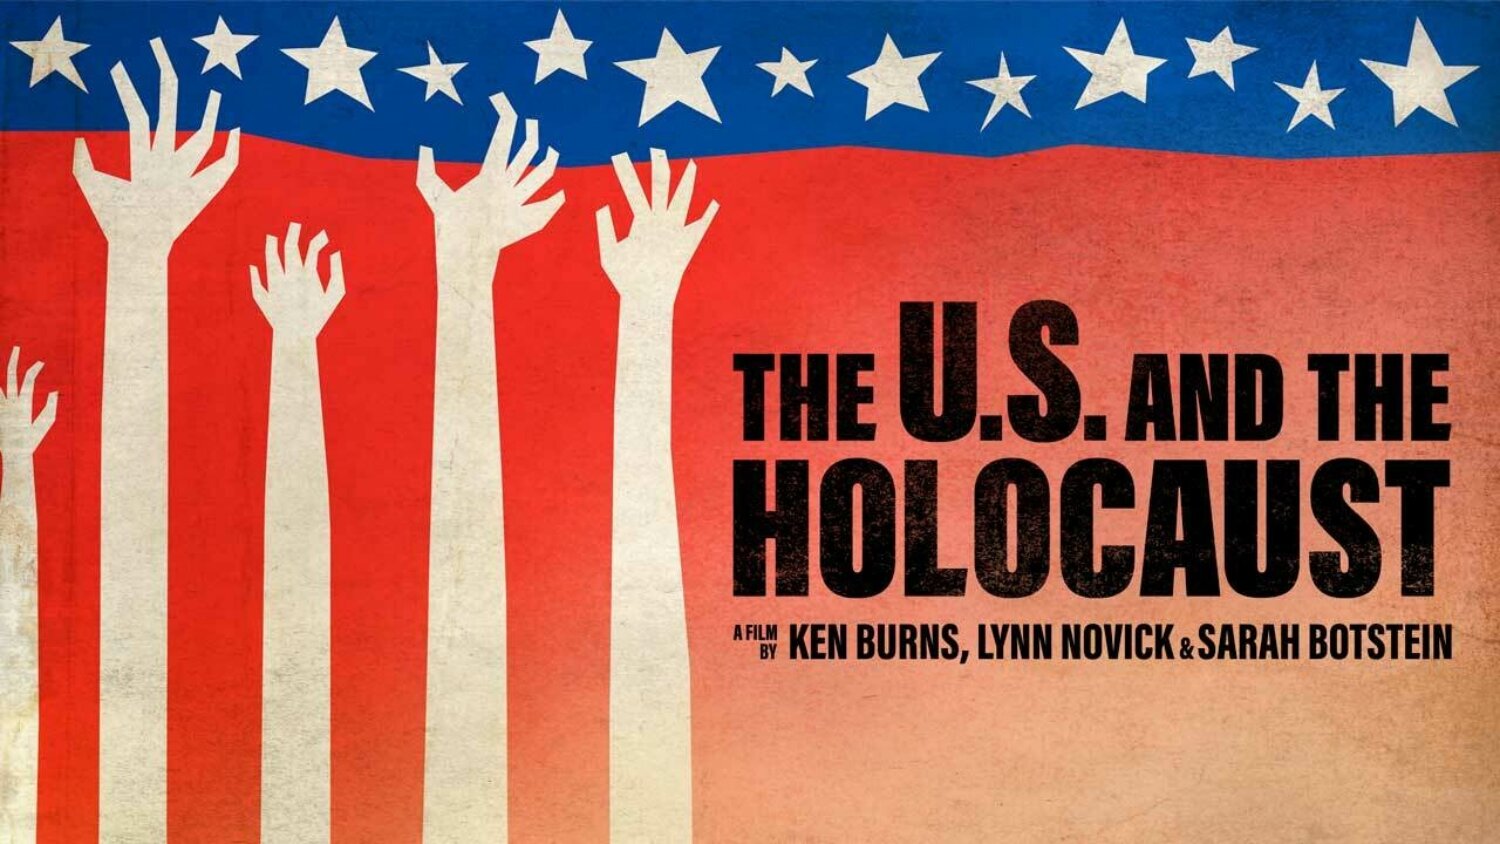 Art for The U.S. and the Holocaust documentary